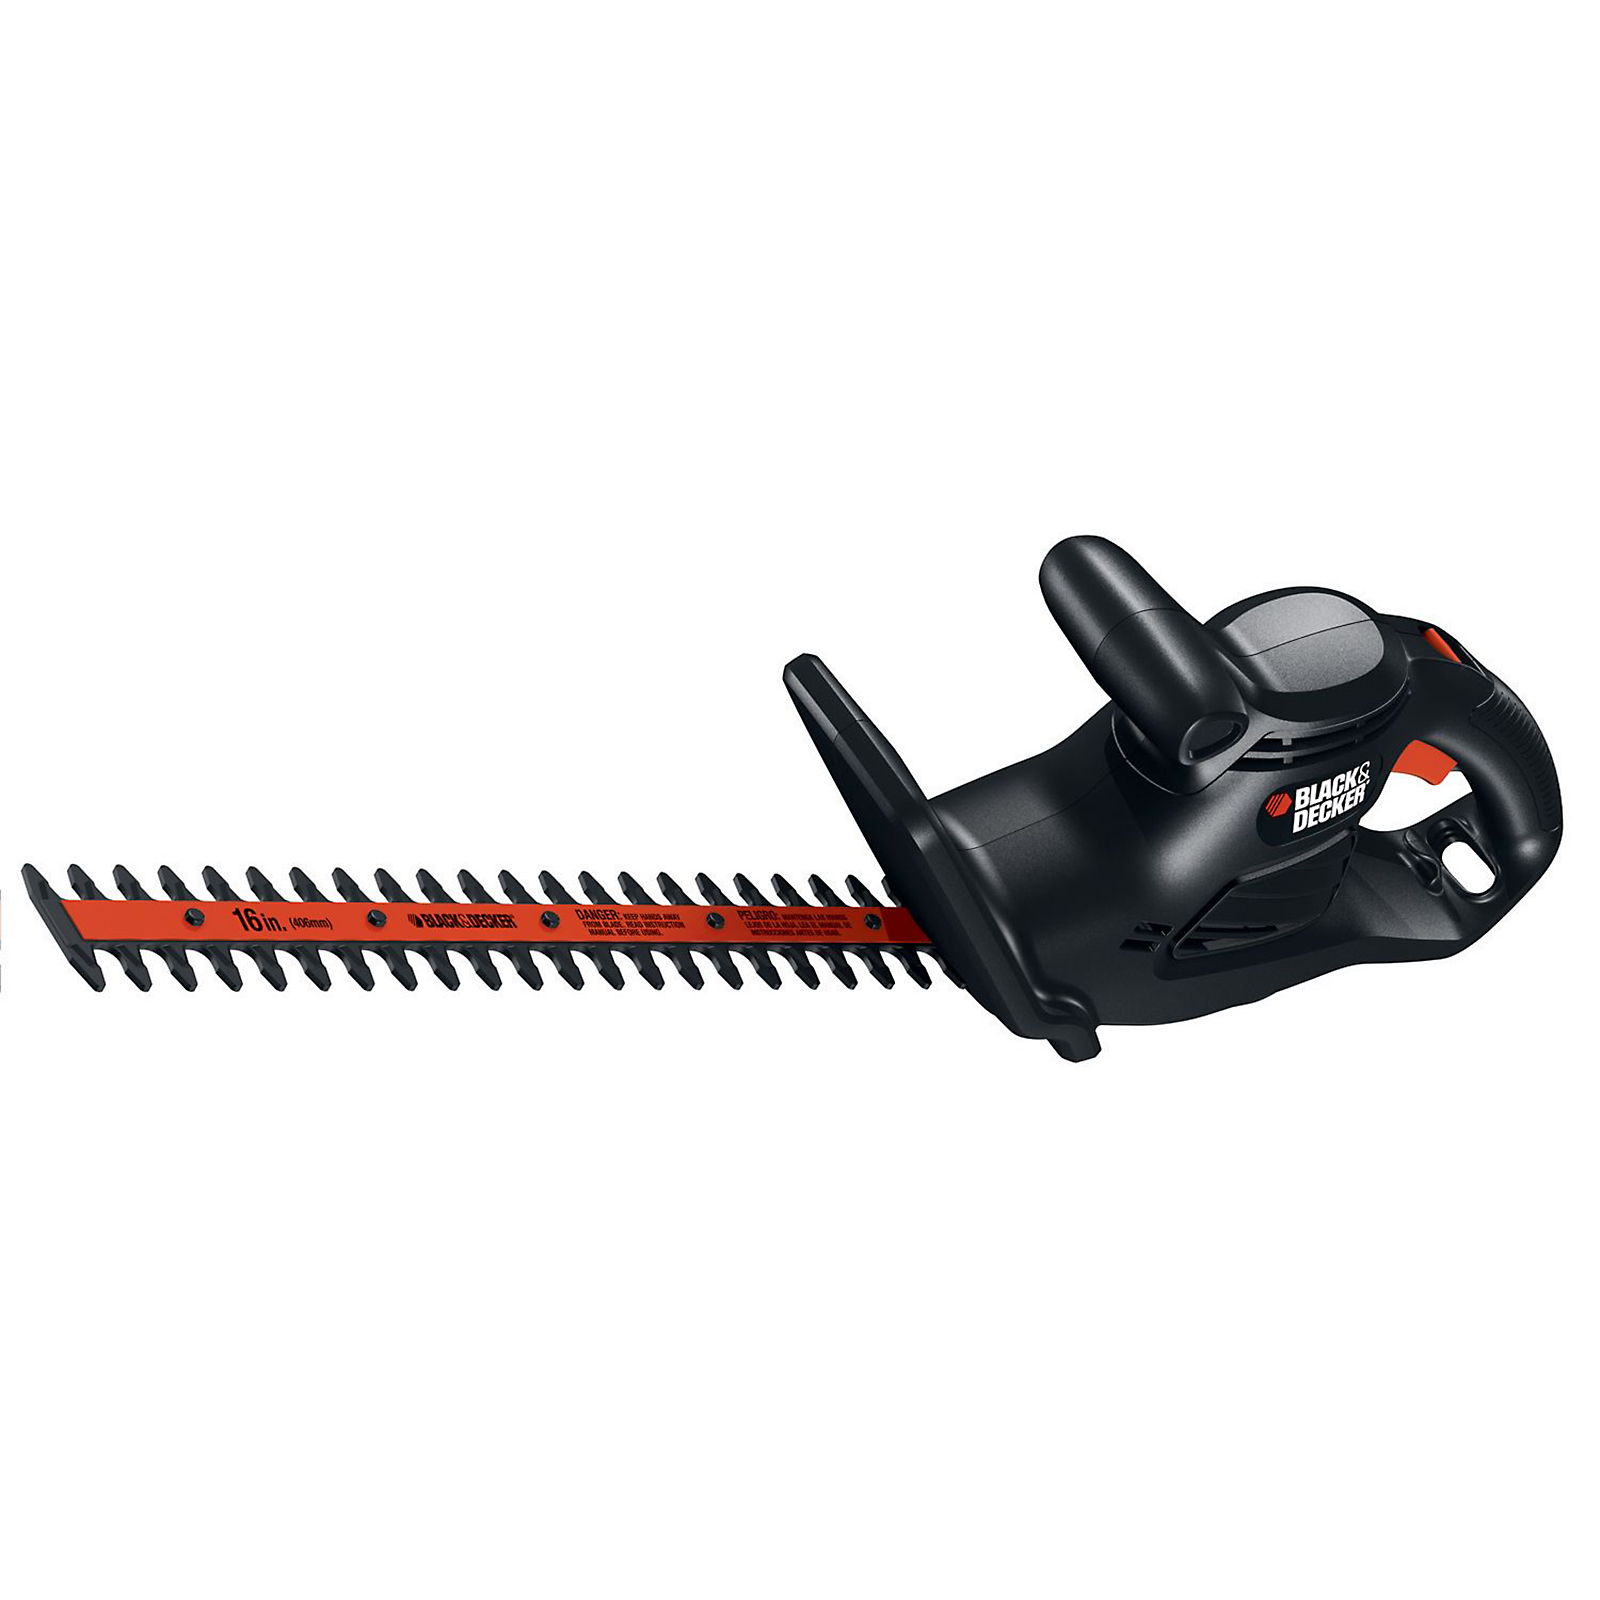 Black & Decker 8124 Deluxe Shrub and Hedge Trimmer (Type 7) Parts and  Accessories at PartsWarehouse